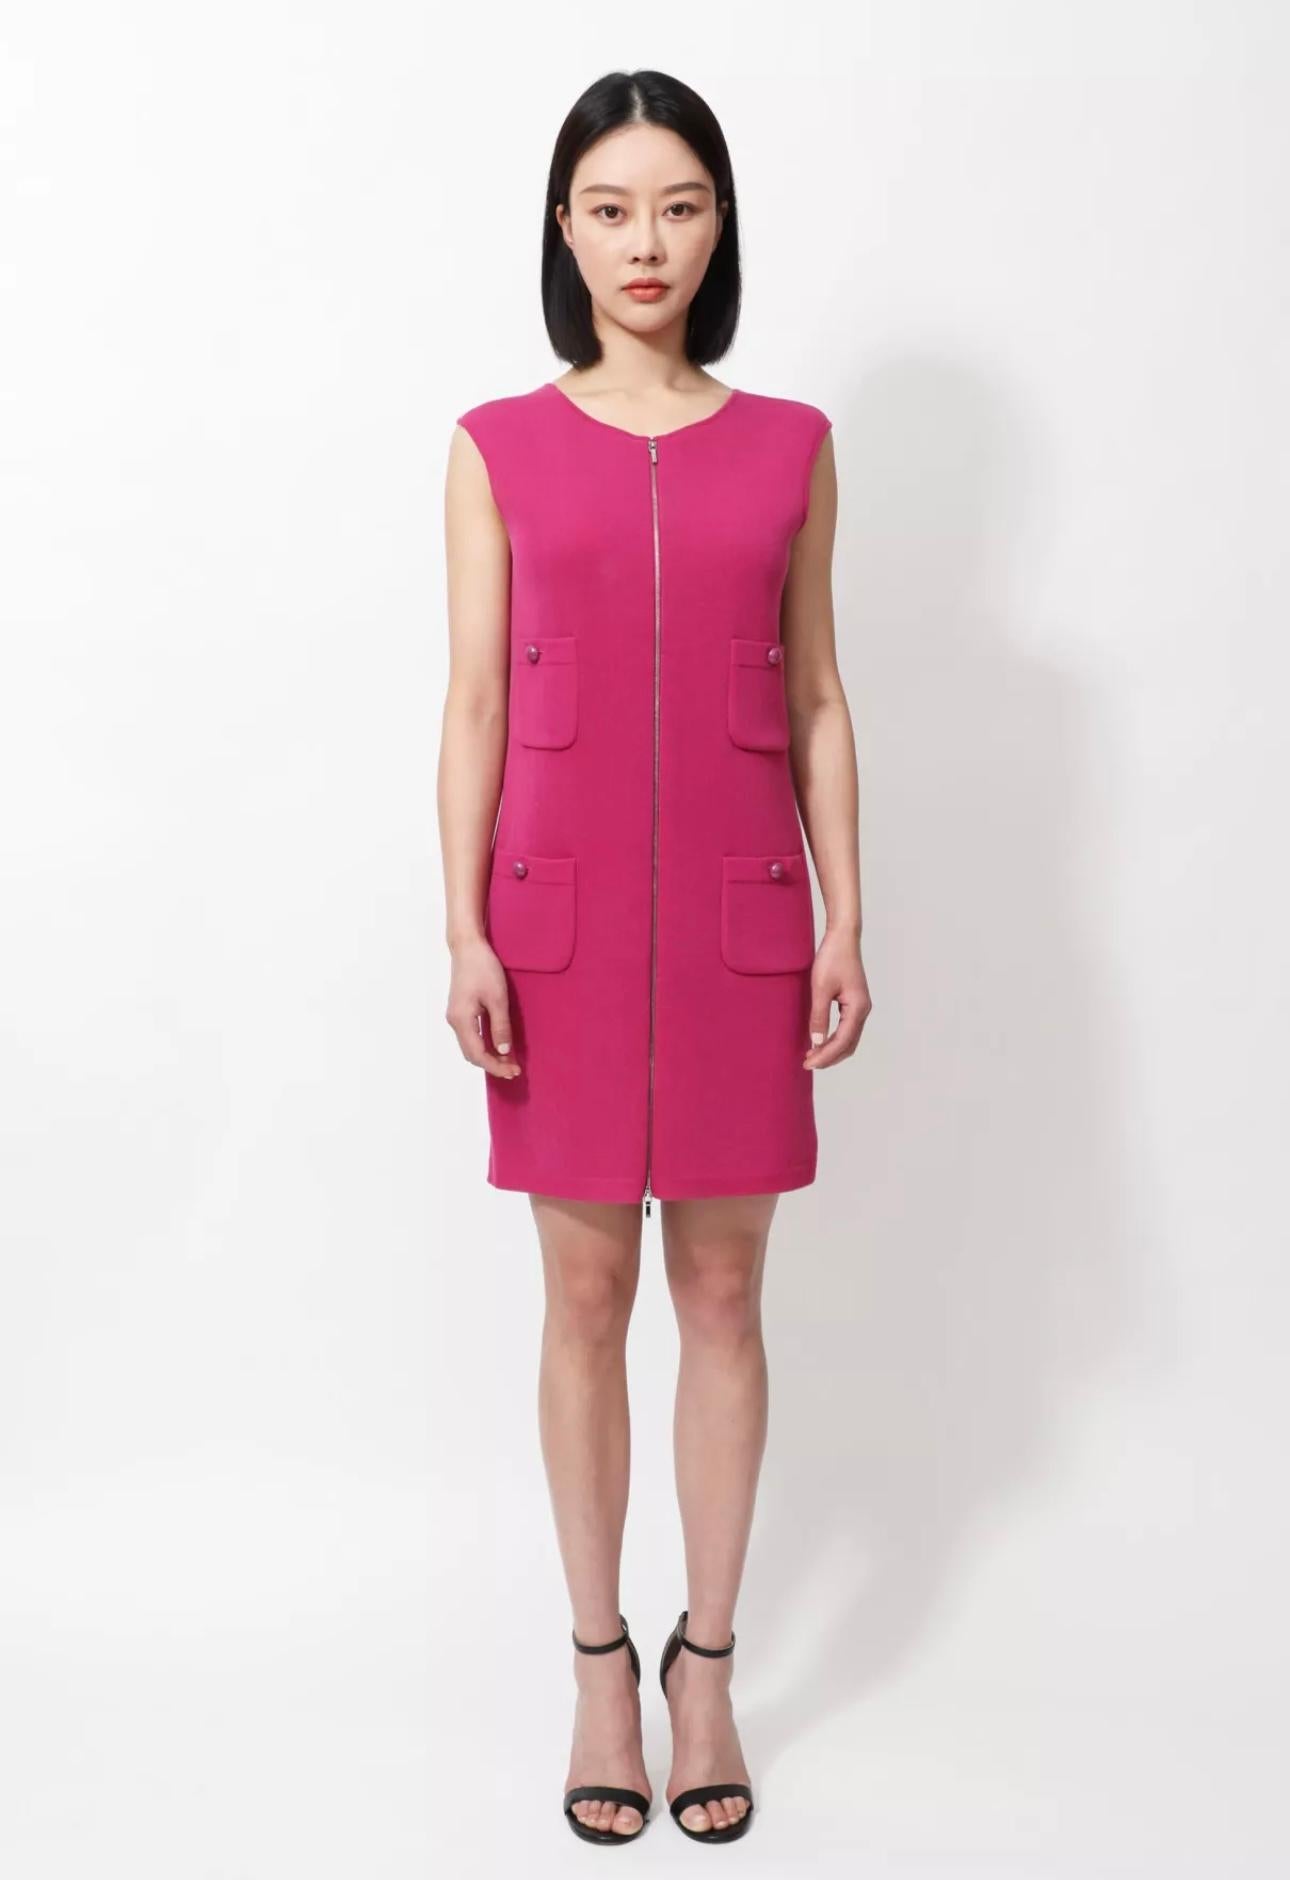 Stylish Chanel fuchsia sleeveless dress from 2015 Spring Collection,
- recognisable 4-flap-pockets silhouette
- CC buttons 
Size mark 38 FR. Condition is pristine.
